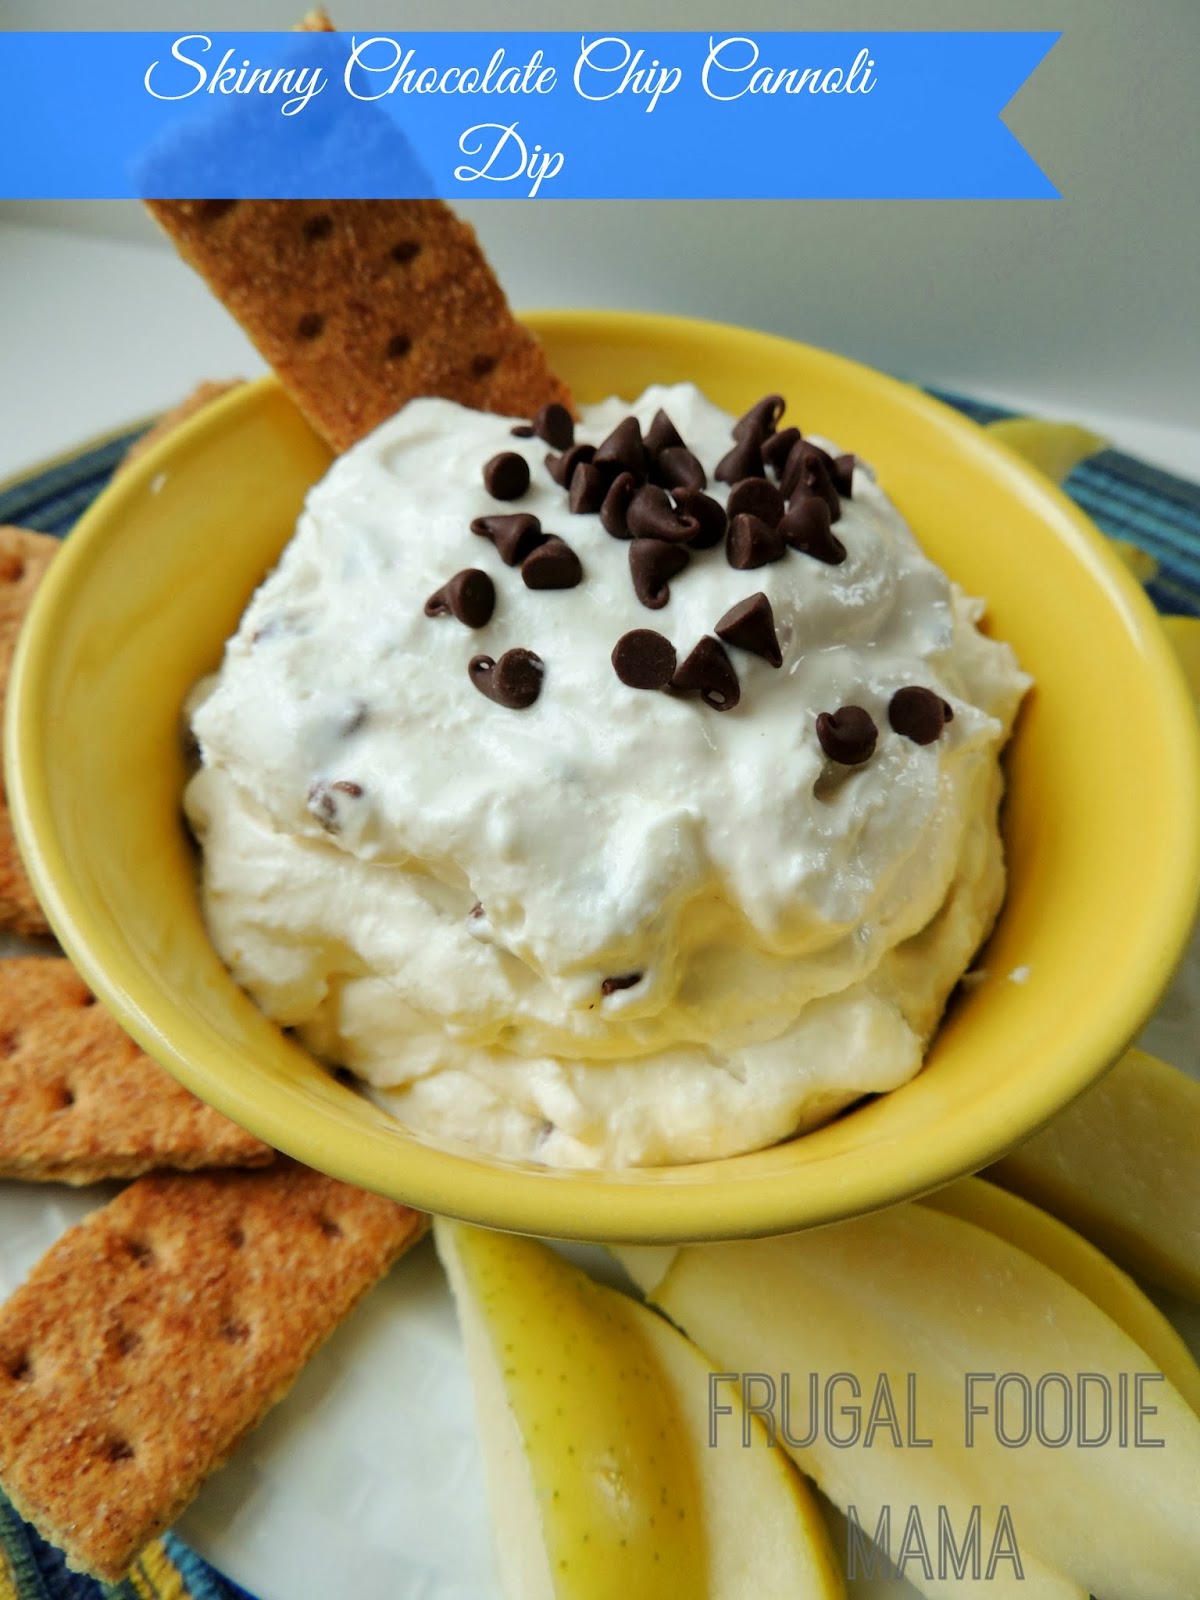 This creamy Skinny Chocolate Chip Cannoli Dip is sure to satisfy your sweet tooth minus the guilt